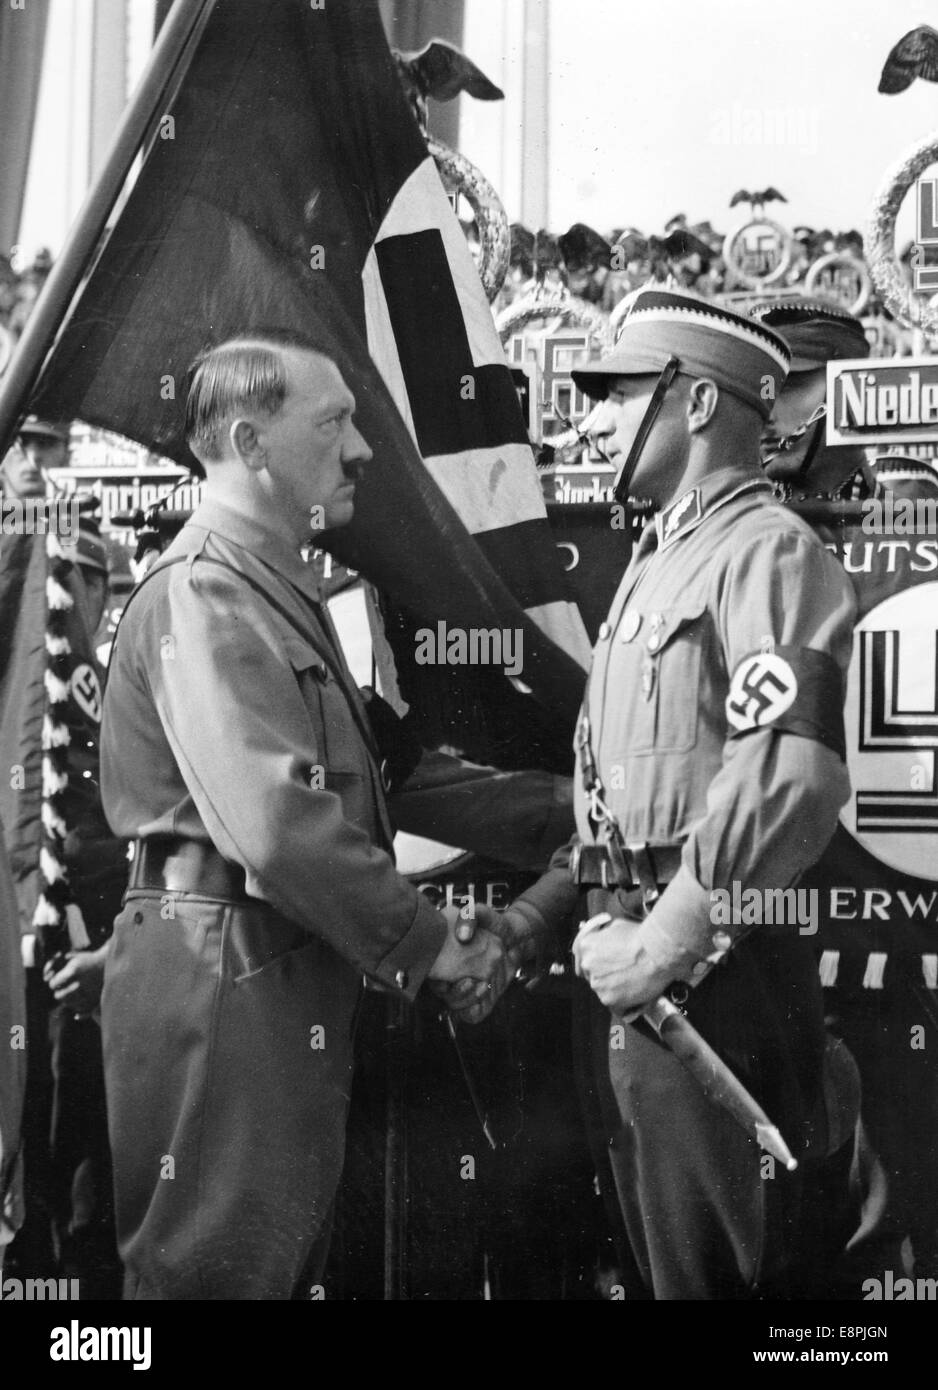 Nuremberg Rally 1937 in Nuremberg, Germany - New banners of the SA (Sturmabteilung), SS (Schutzstaffel) and NSKK (National Socialist Motor Corps) are blessed by Adolf Hitler with the 'Blood-flag'. The 'Blood-flag' (behind Hitler) was supposedly carried during the failed Beer Hall Putsch. Fotoarchiv für Zeitgeschichtee - NO WIRE SERVICE – Stock Photo